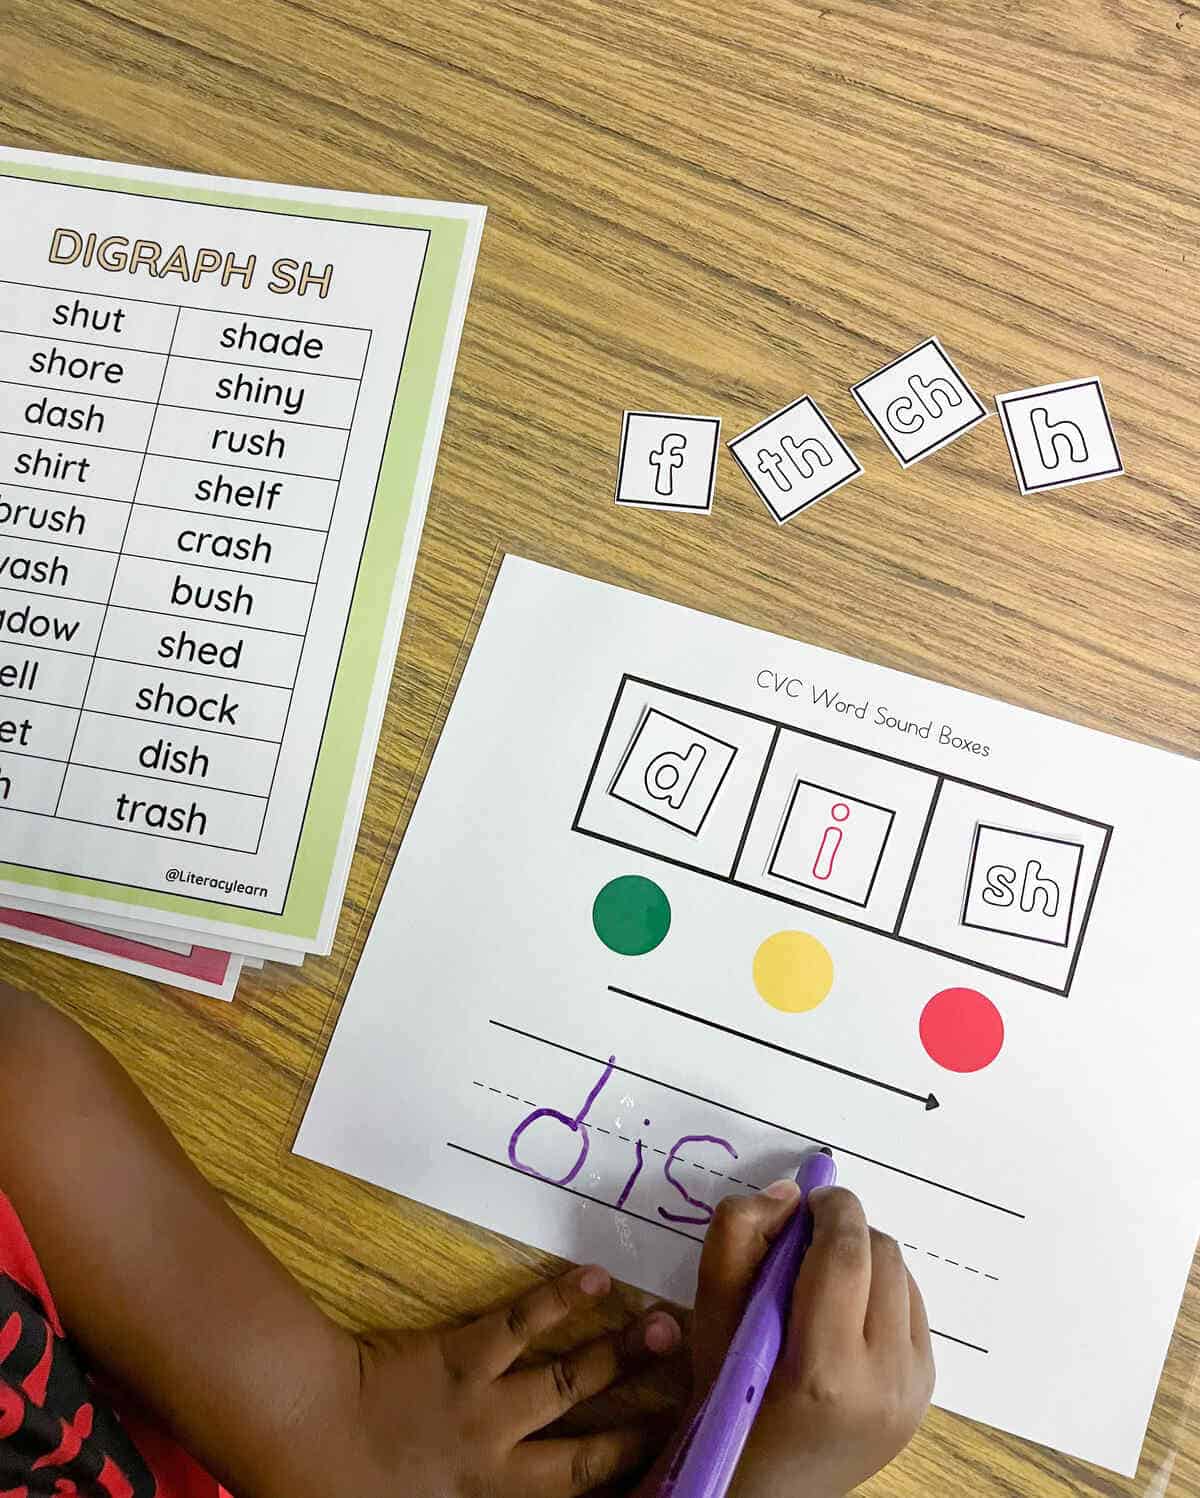 A child's hands writing a word on a worksheet with the digraph list beside it.